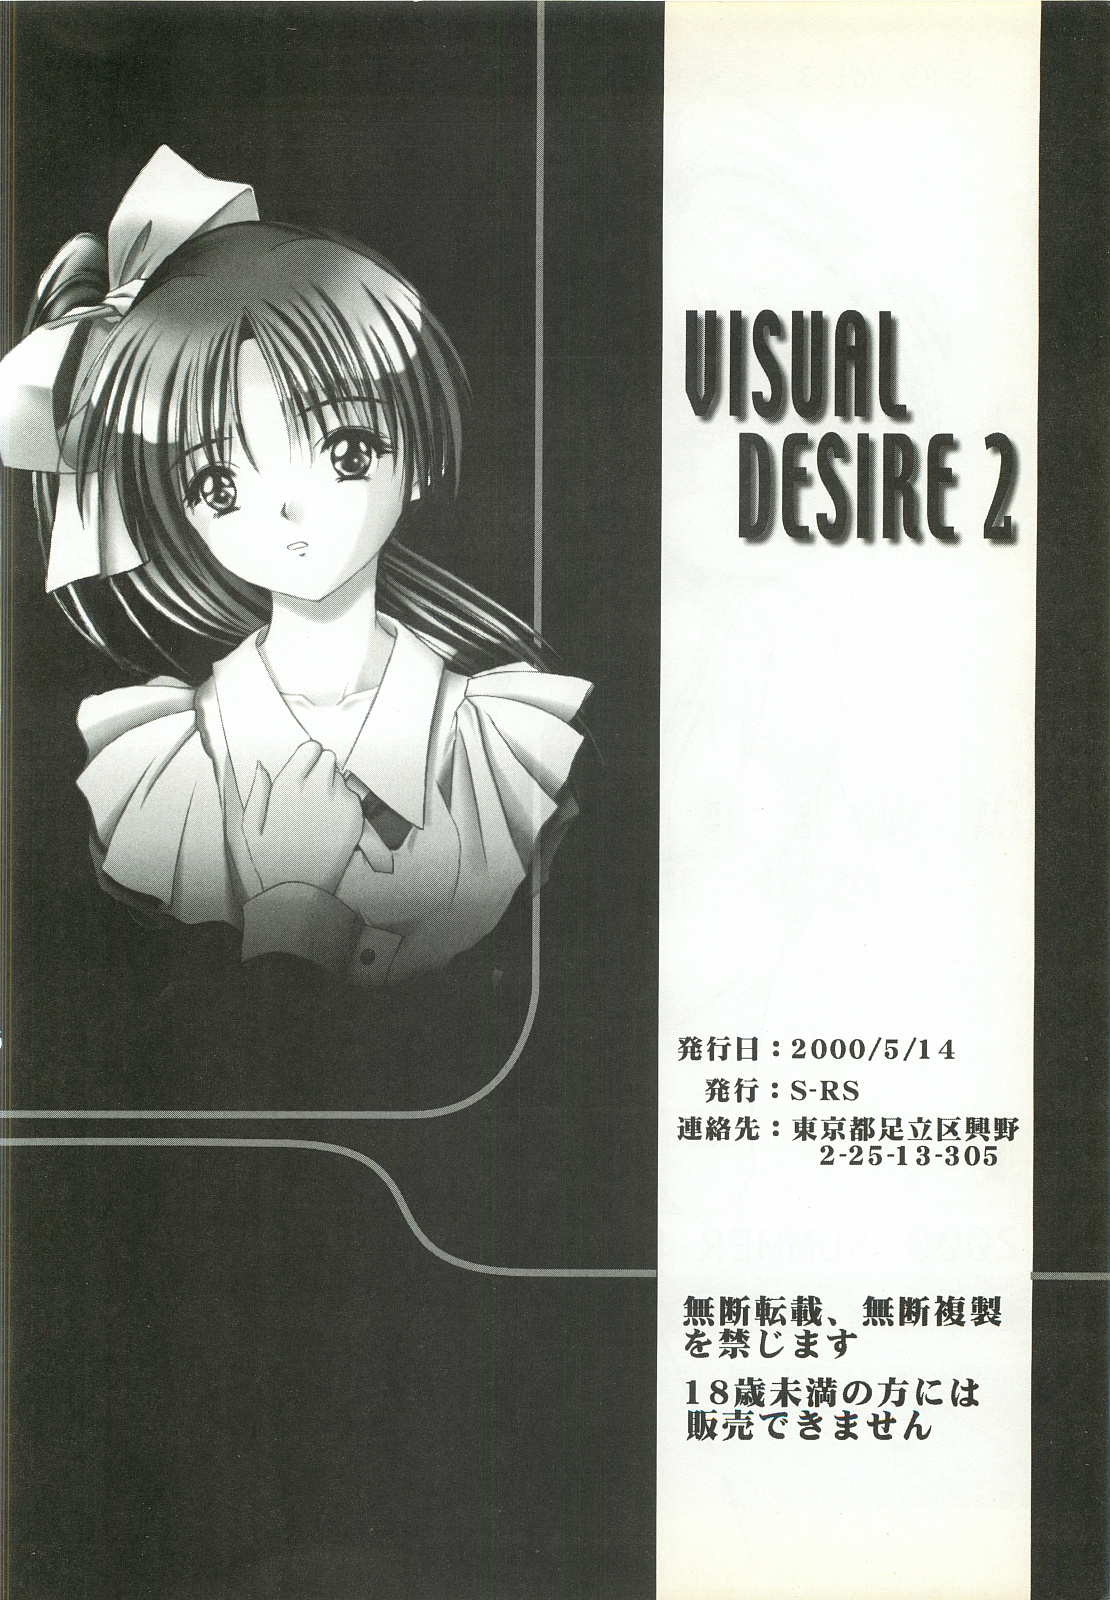 [FINAL EVOLUTION S-RS (ZAN, ちょすけ)] VISUAL DESIRE 2 (With You)